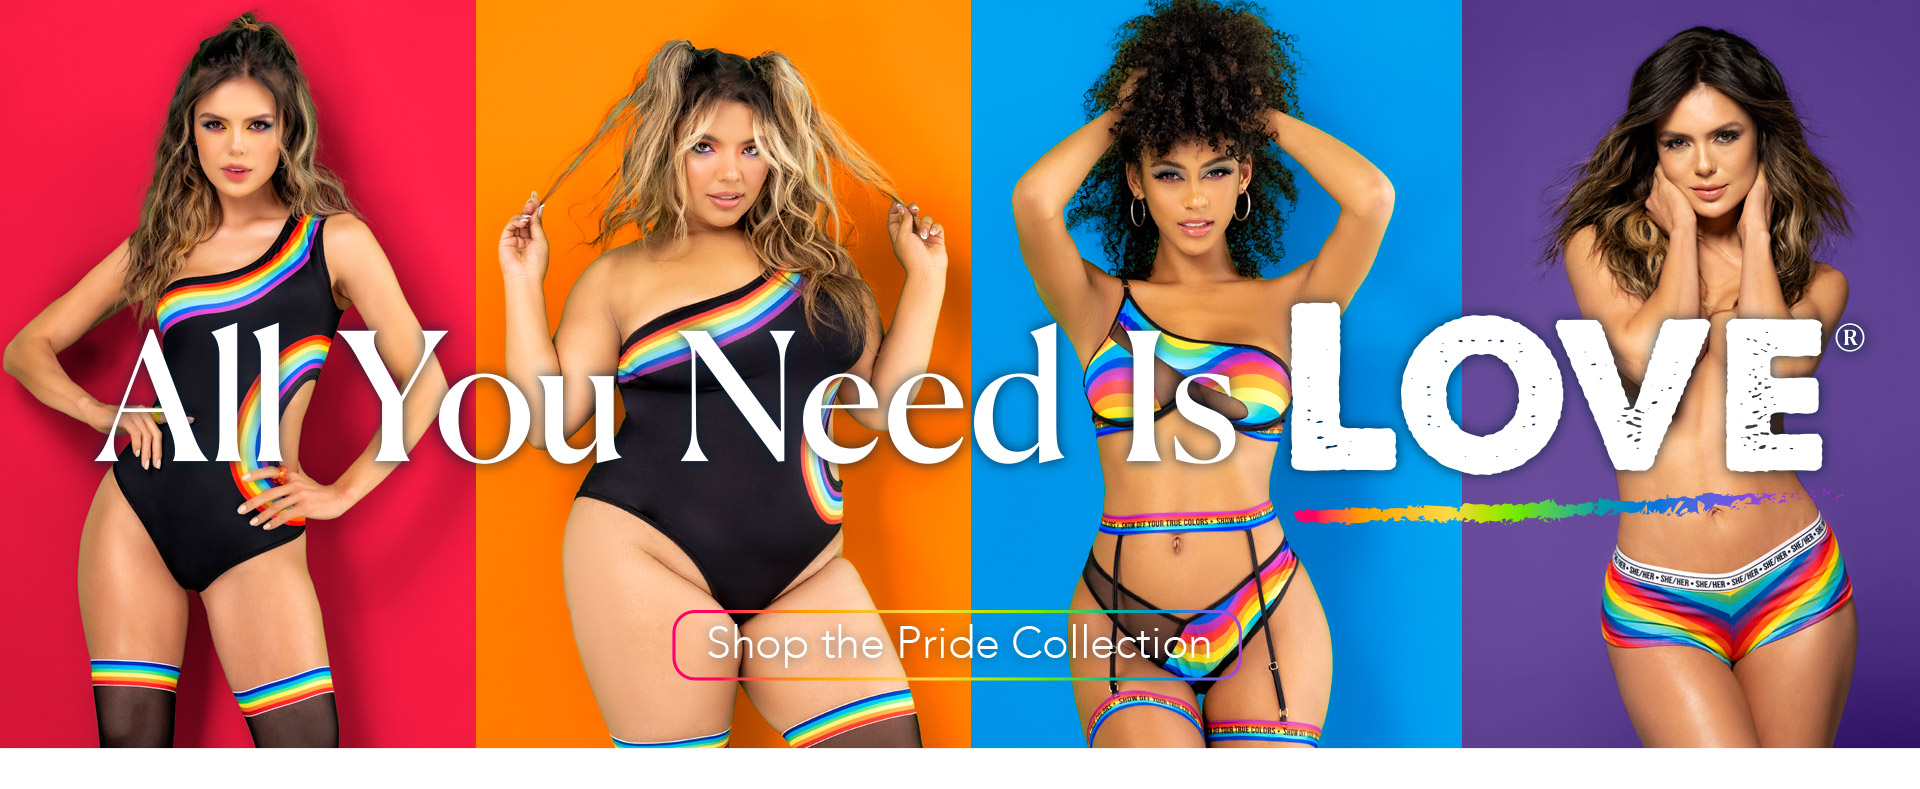 All you need is LOVE - Shop the Pride Collection